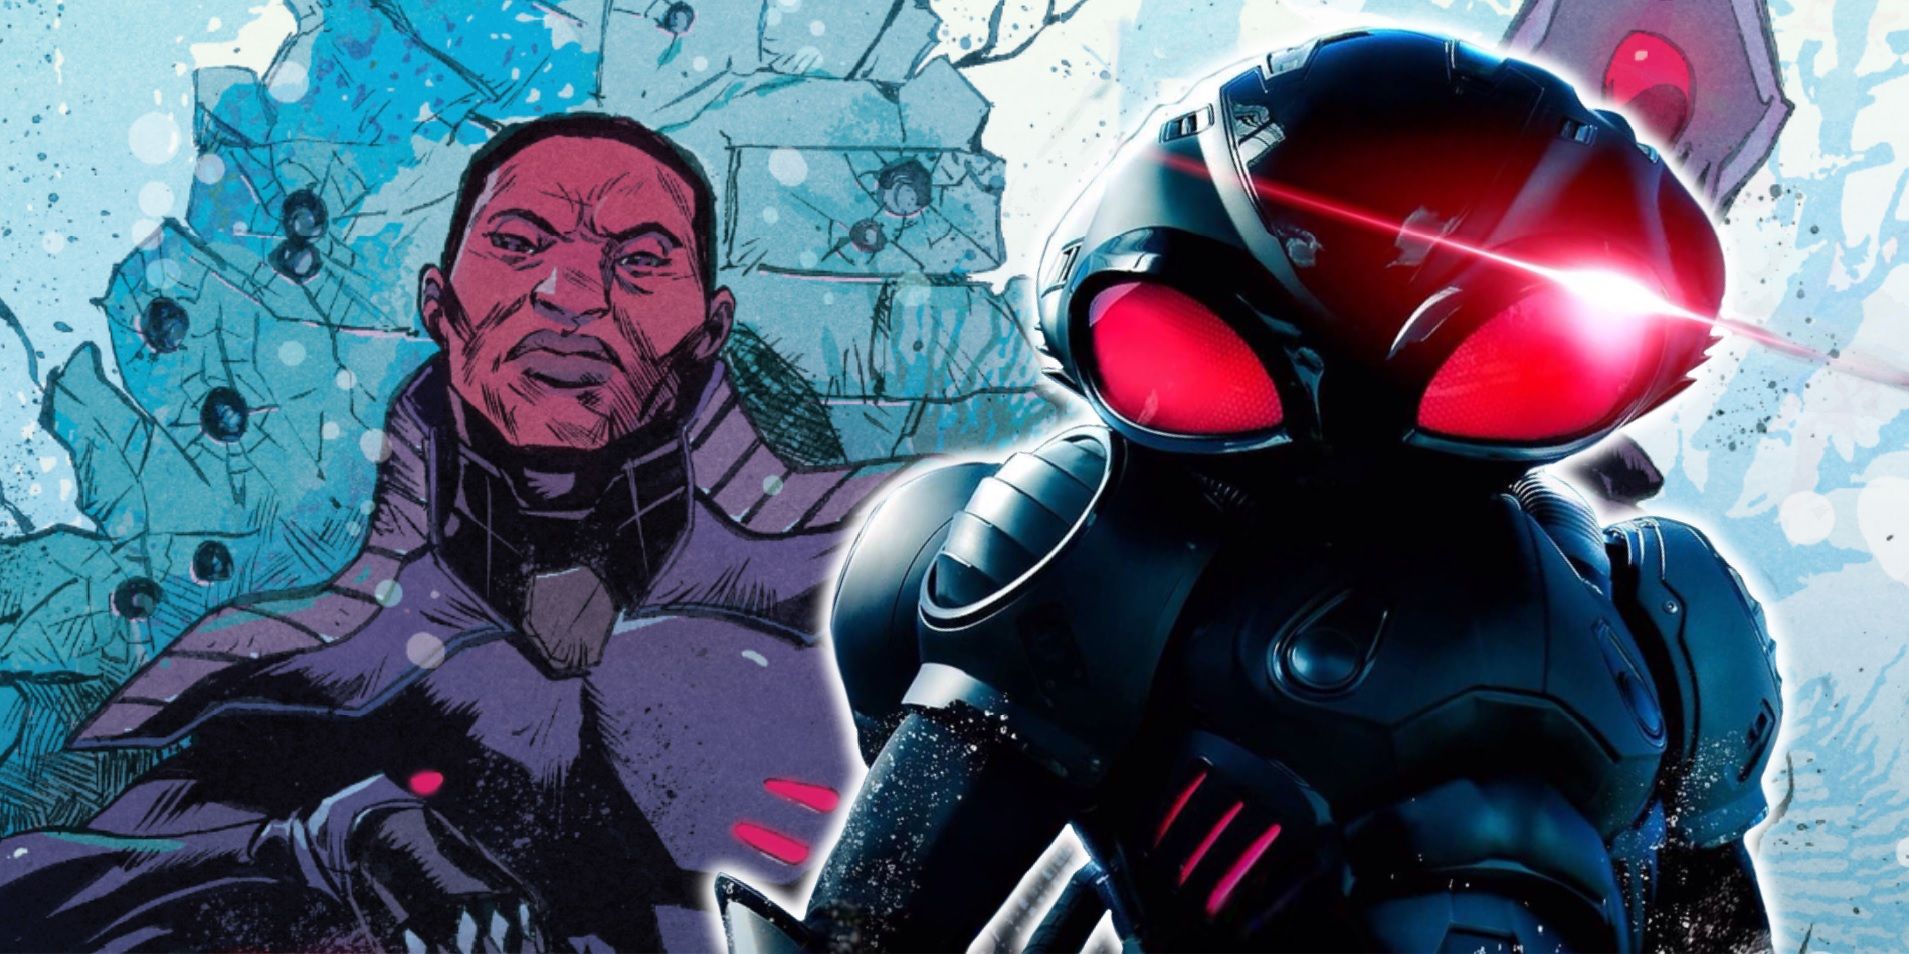 Black Manta as he appeared in the Aquaman and in art by Sanford Greene